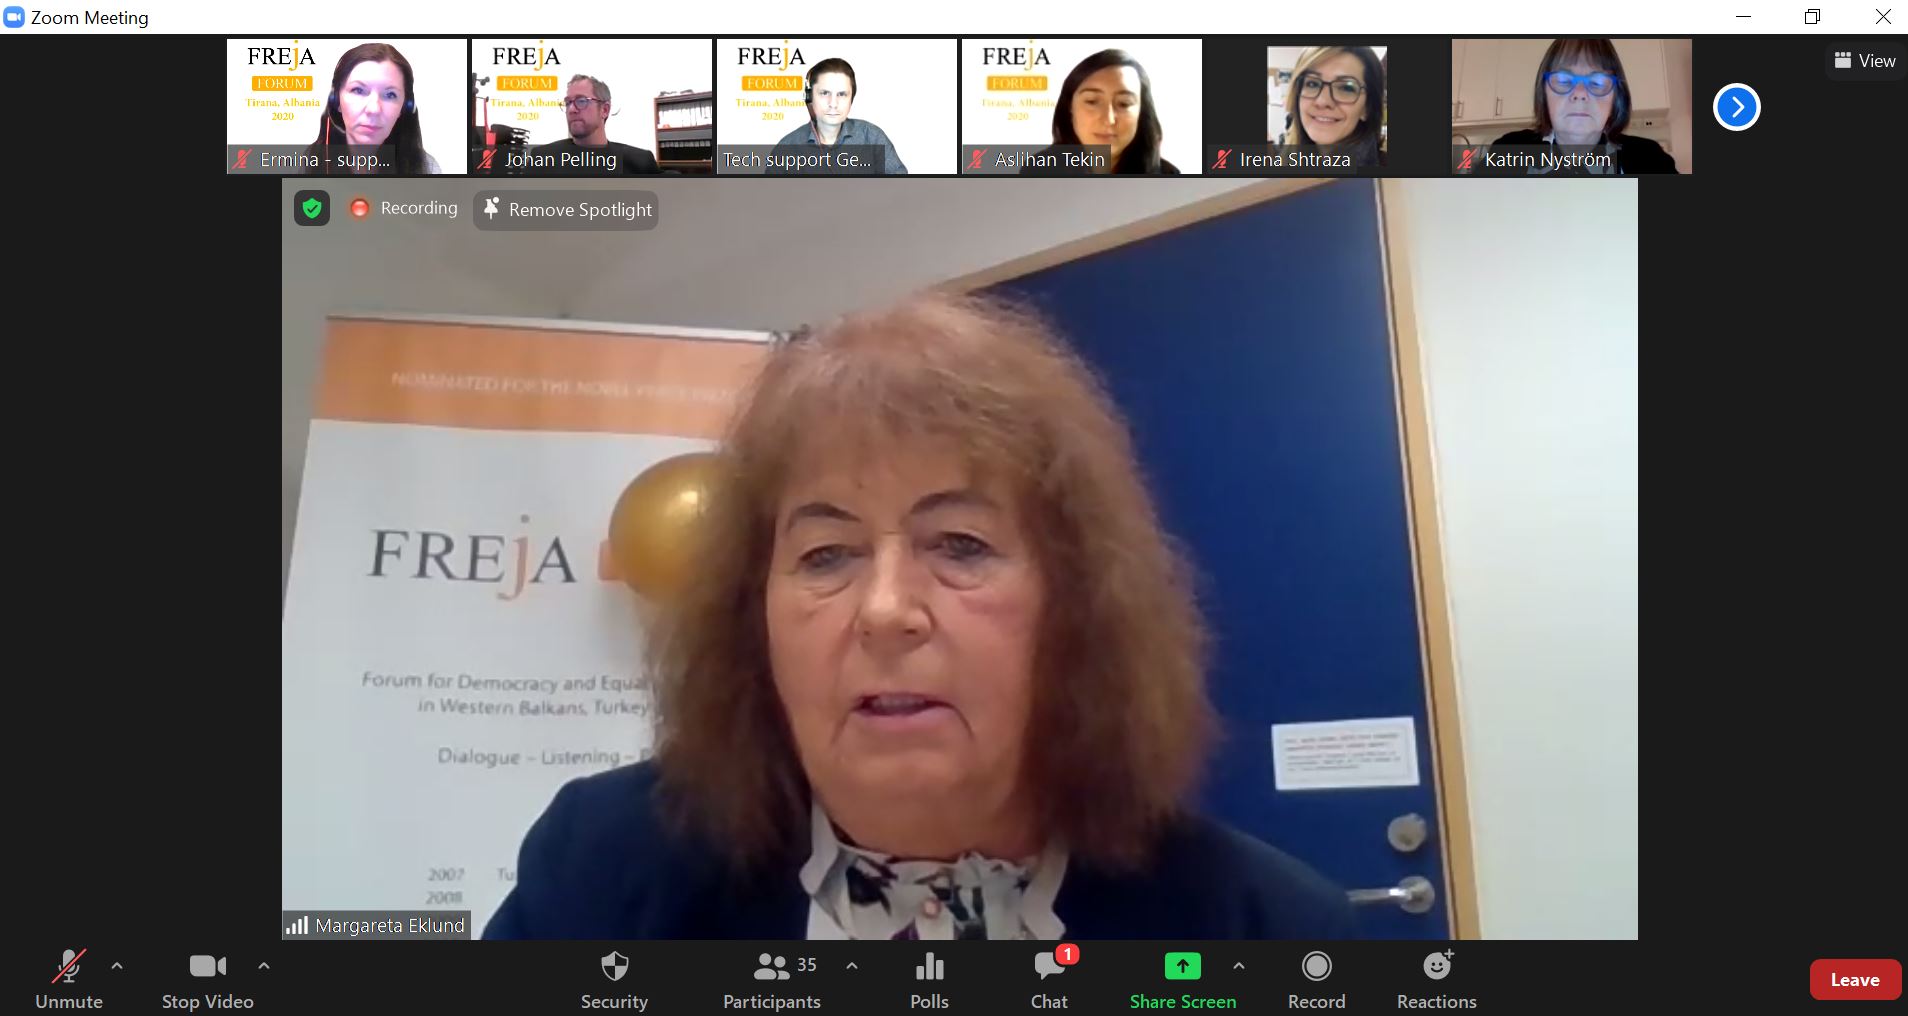 Redhaired woman on digital meeting, Freja poster in background.